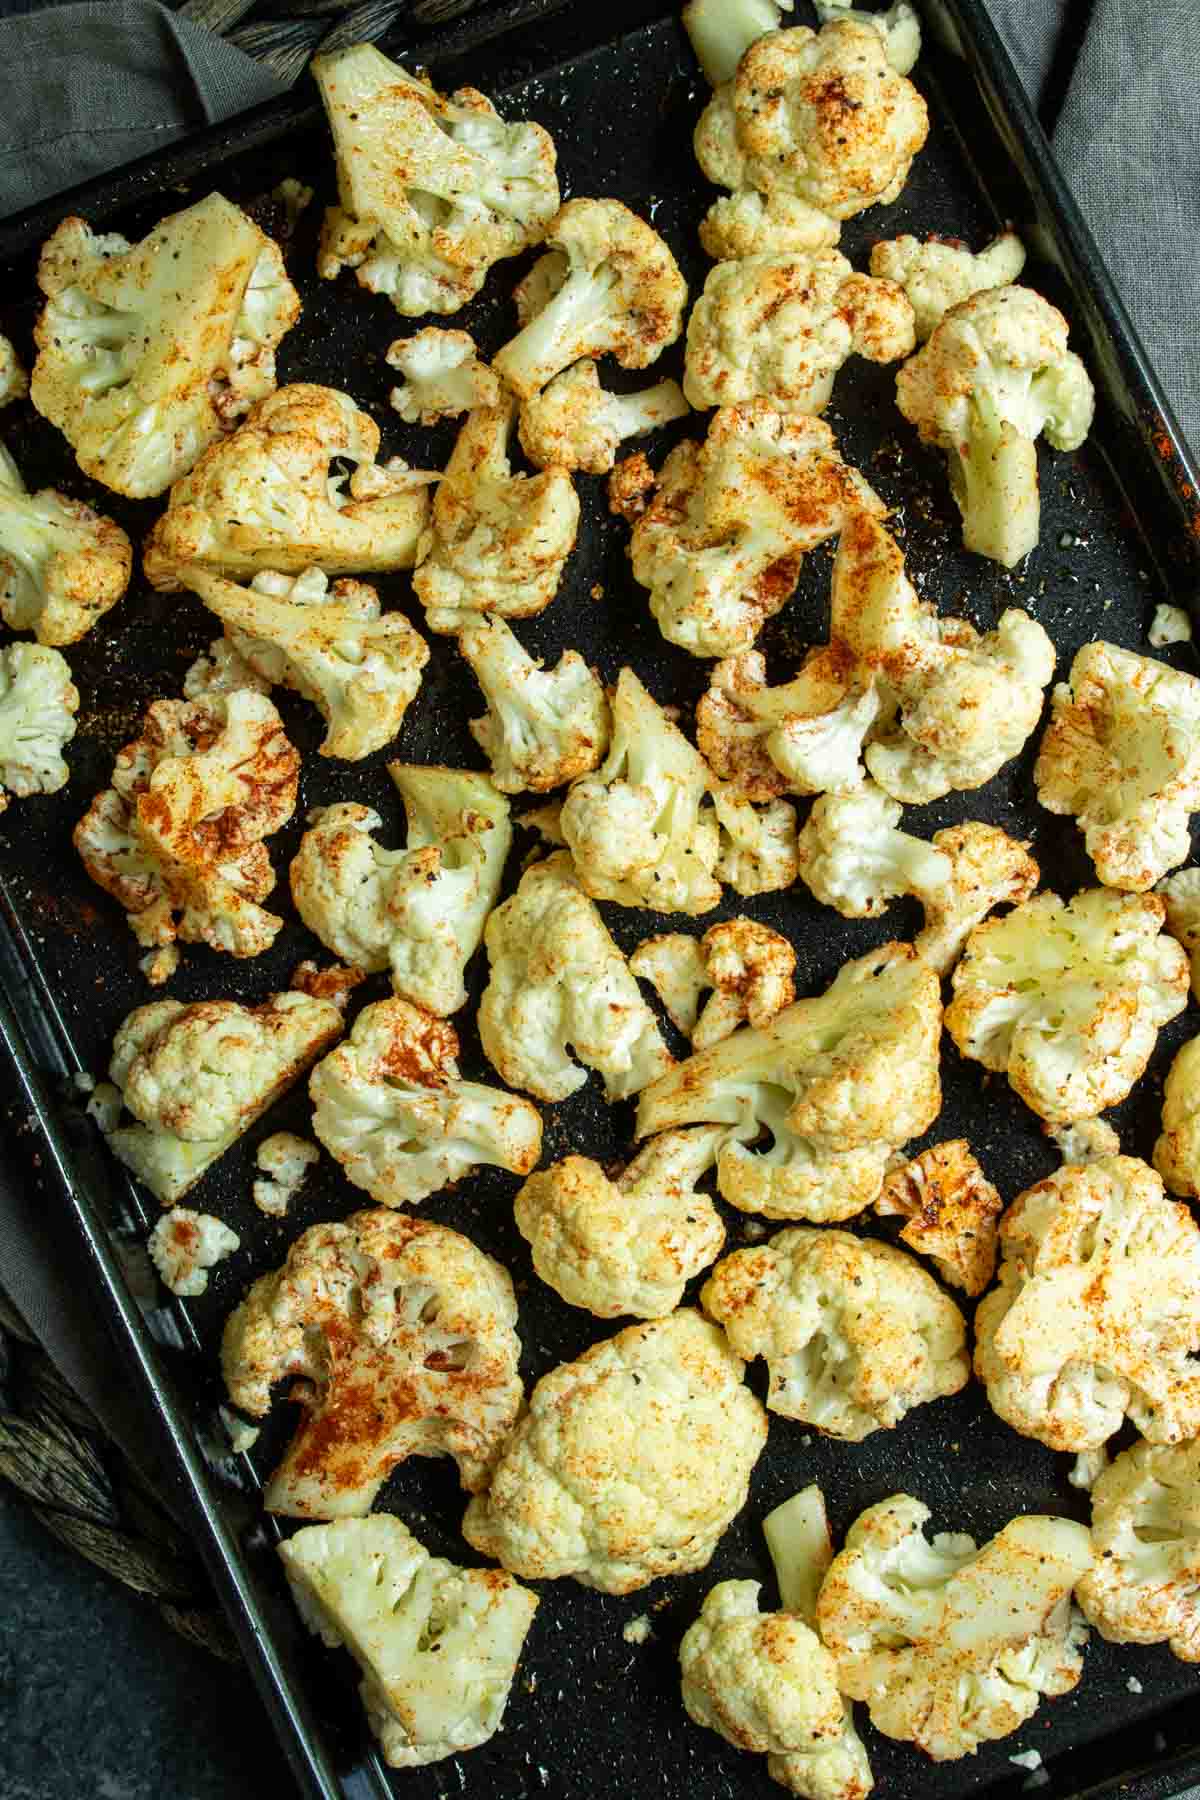 Roasted Cauliflower in the Air Fryer seasoned with spices on a baking sheet.